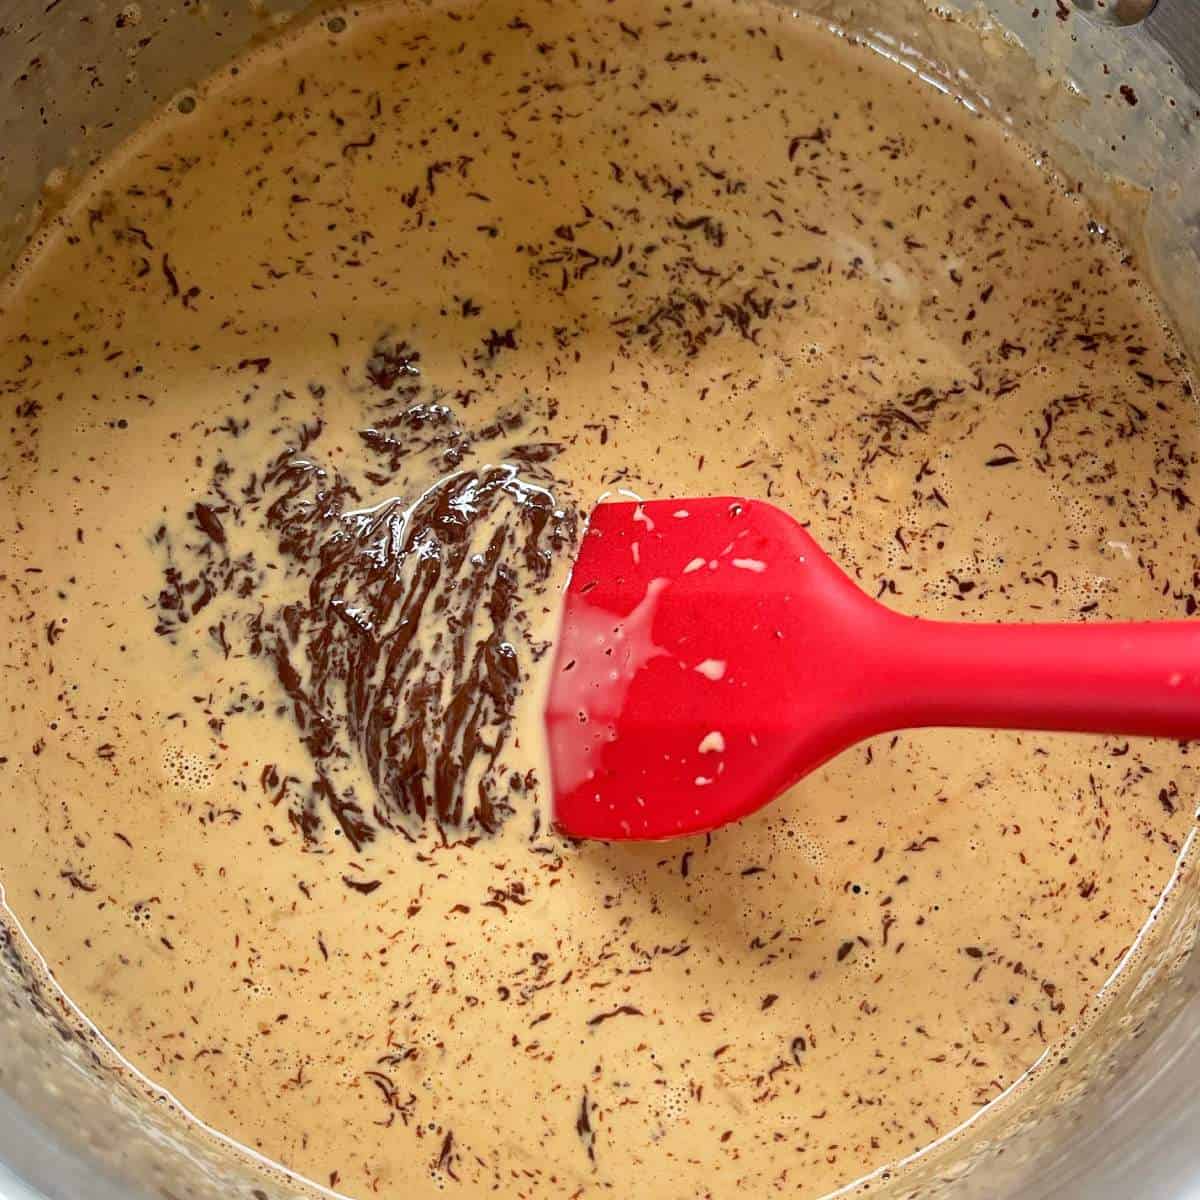 Heated cream with coffee and chocolate been gently melted through for Coffee Chocolate Parfaits.